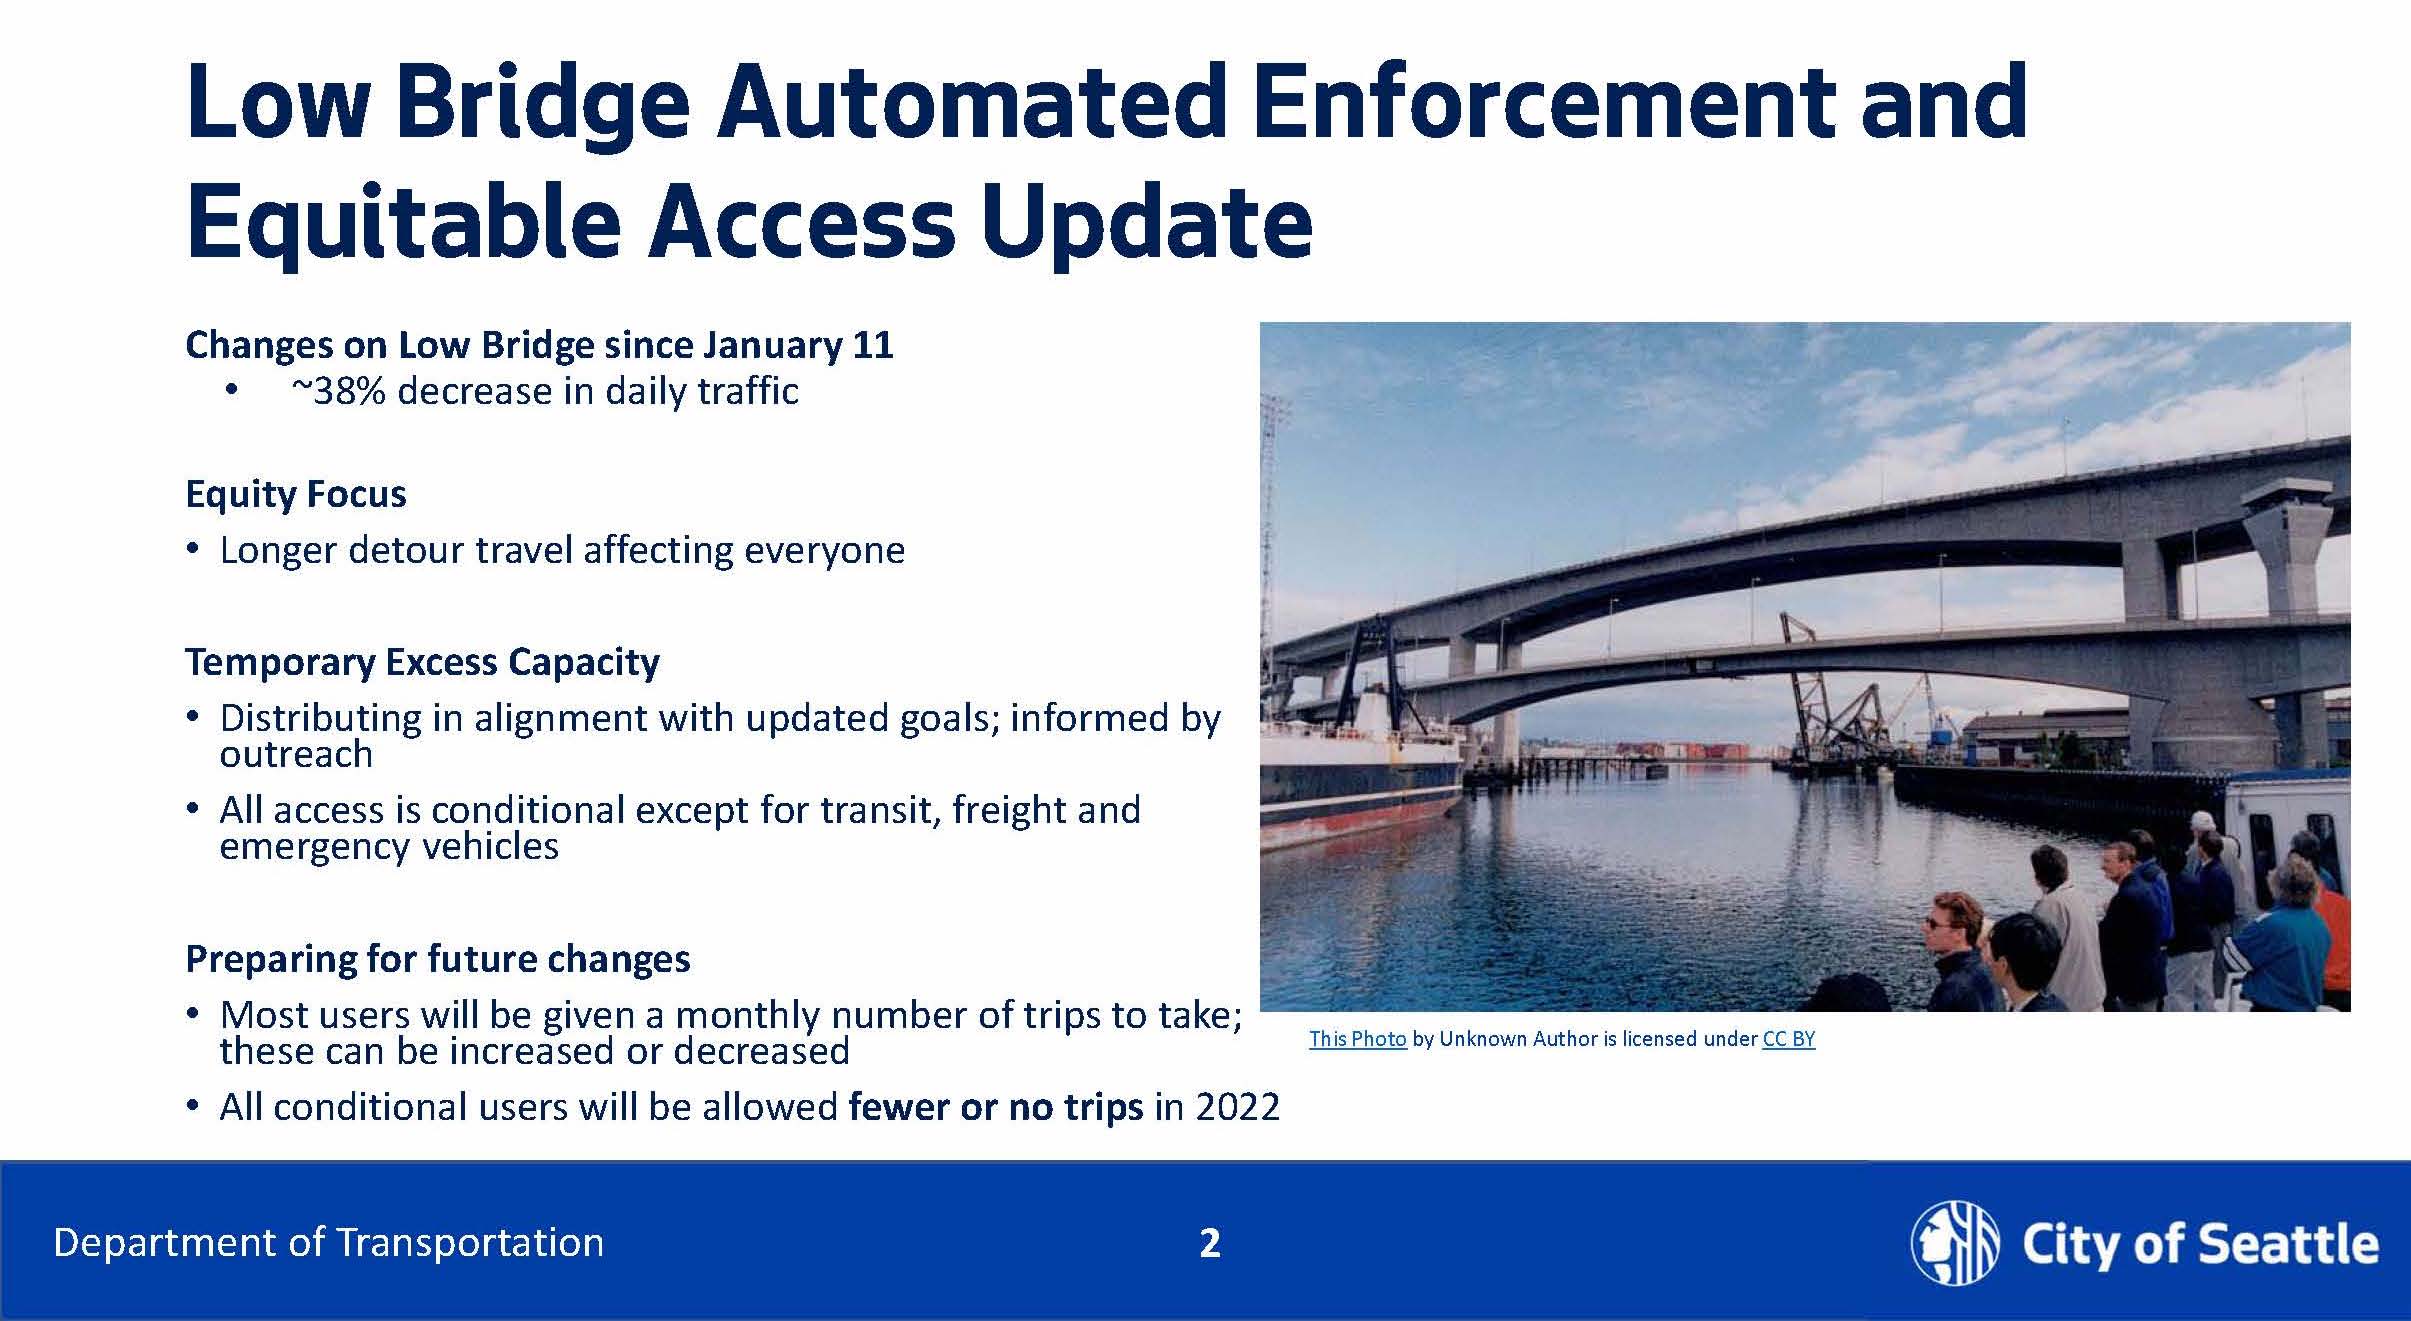 Automated enforcement and equitable access update